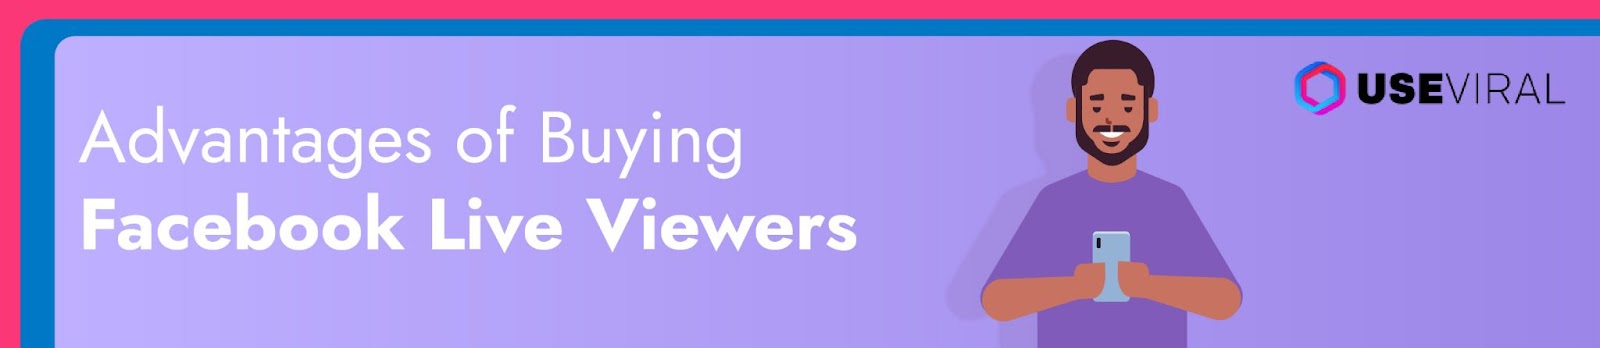 Advantages of Buying Facebook Live Viewers